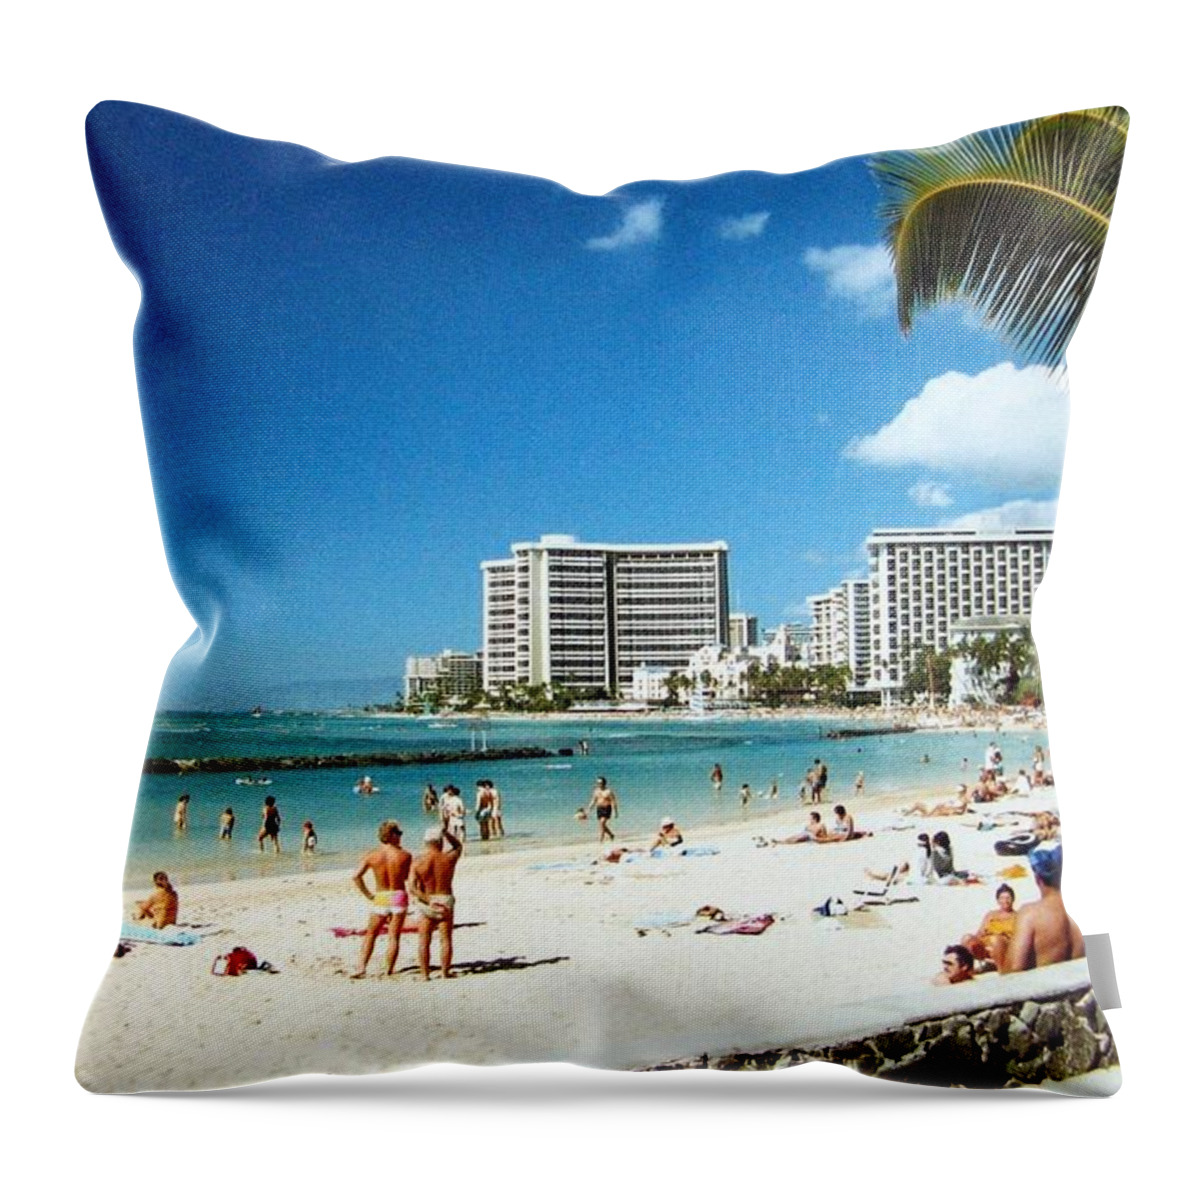 1986 Throw Pillow featuring the photograph Waikiki Beach by Will Borden